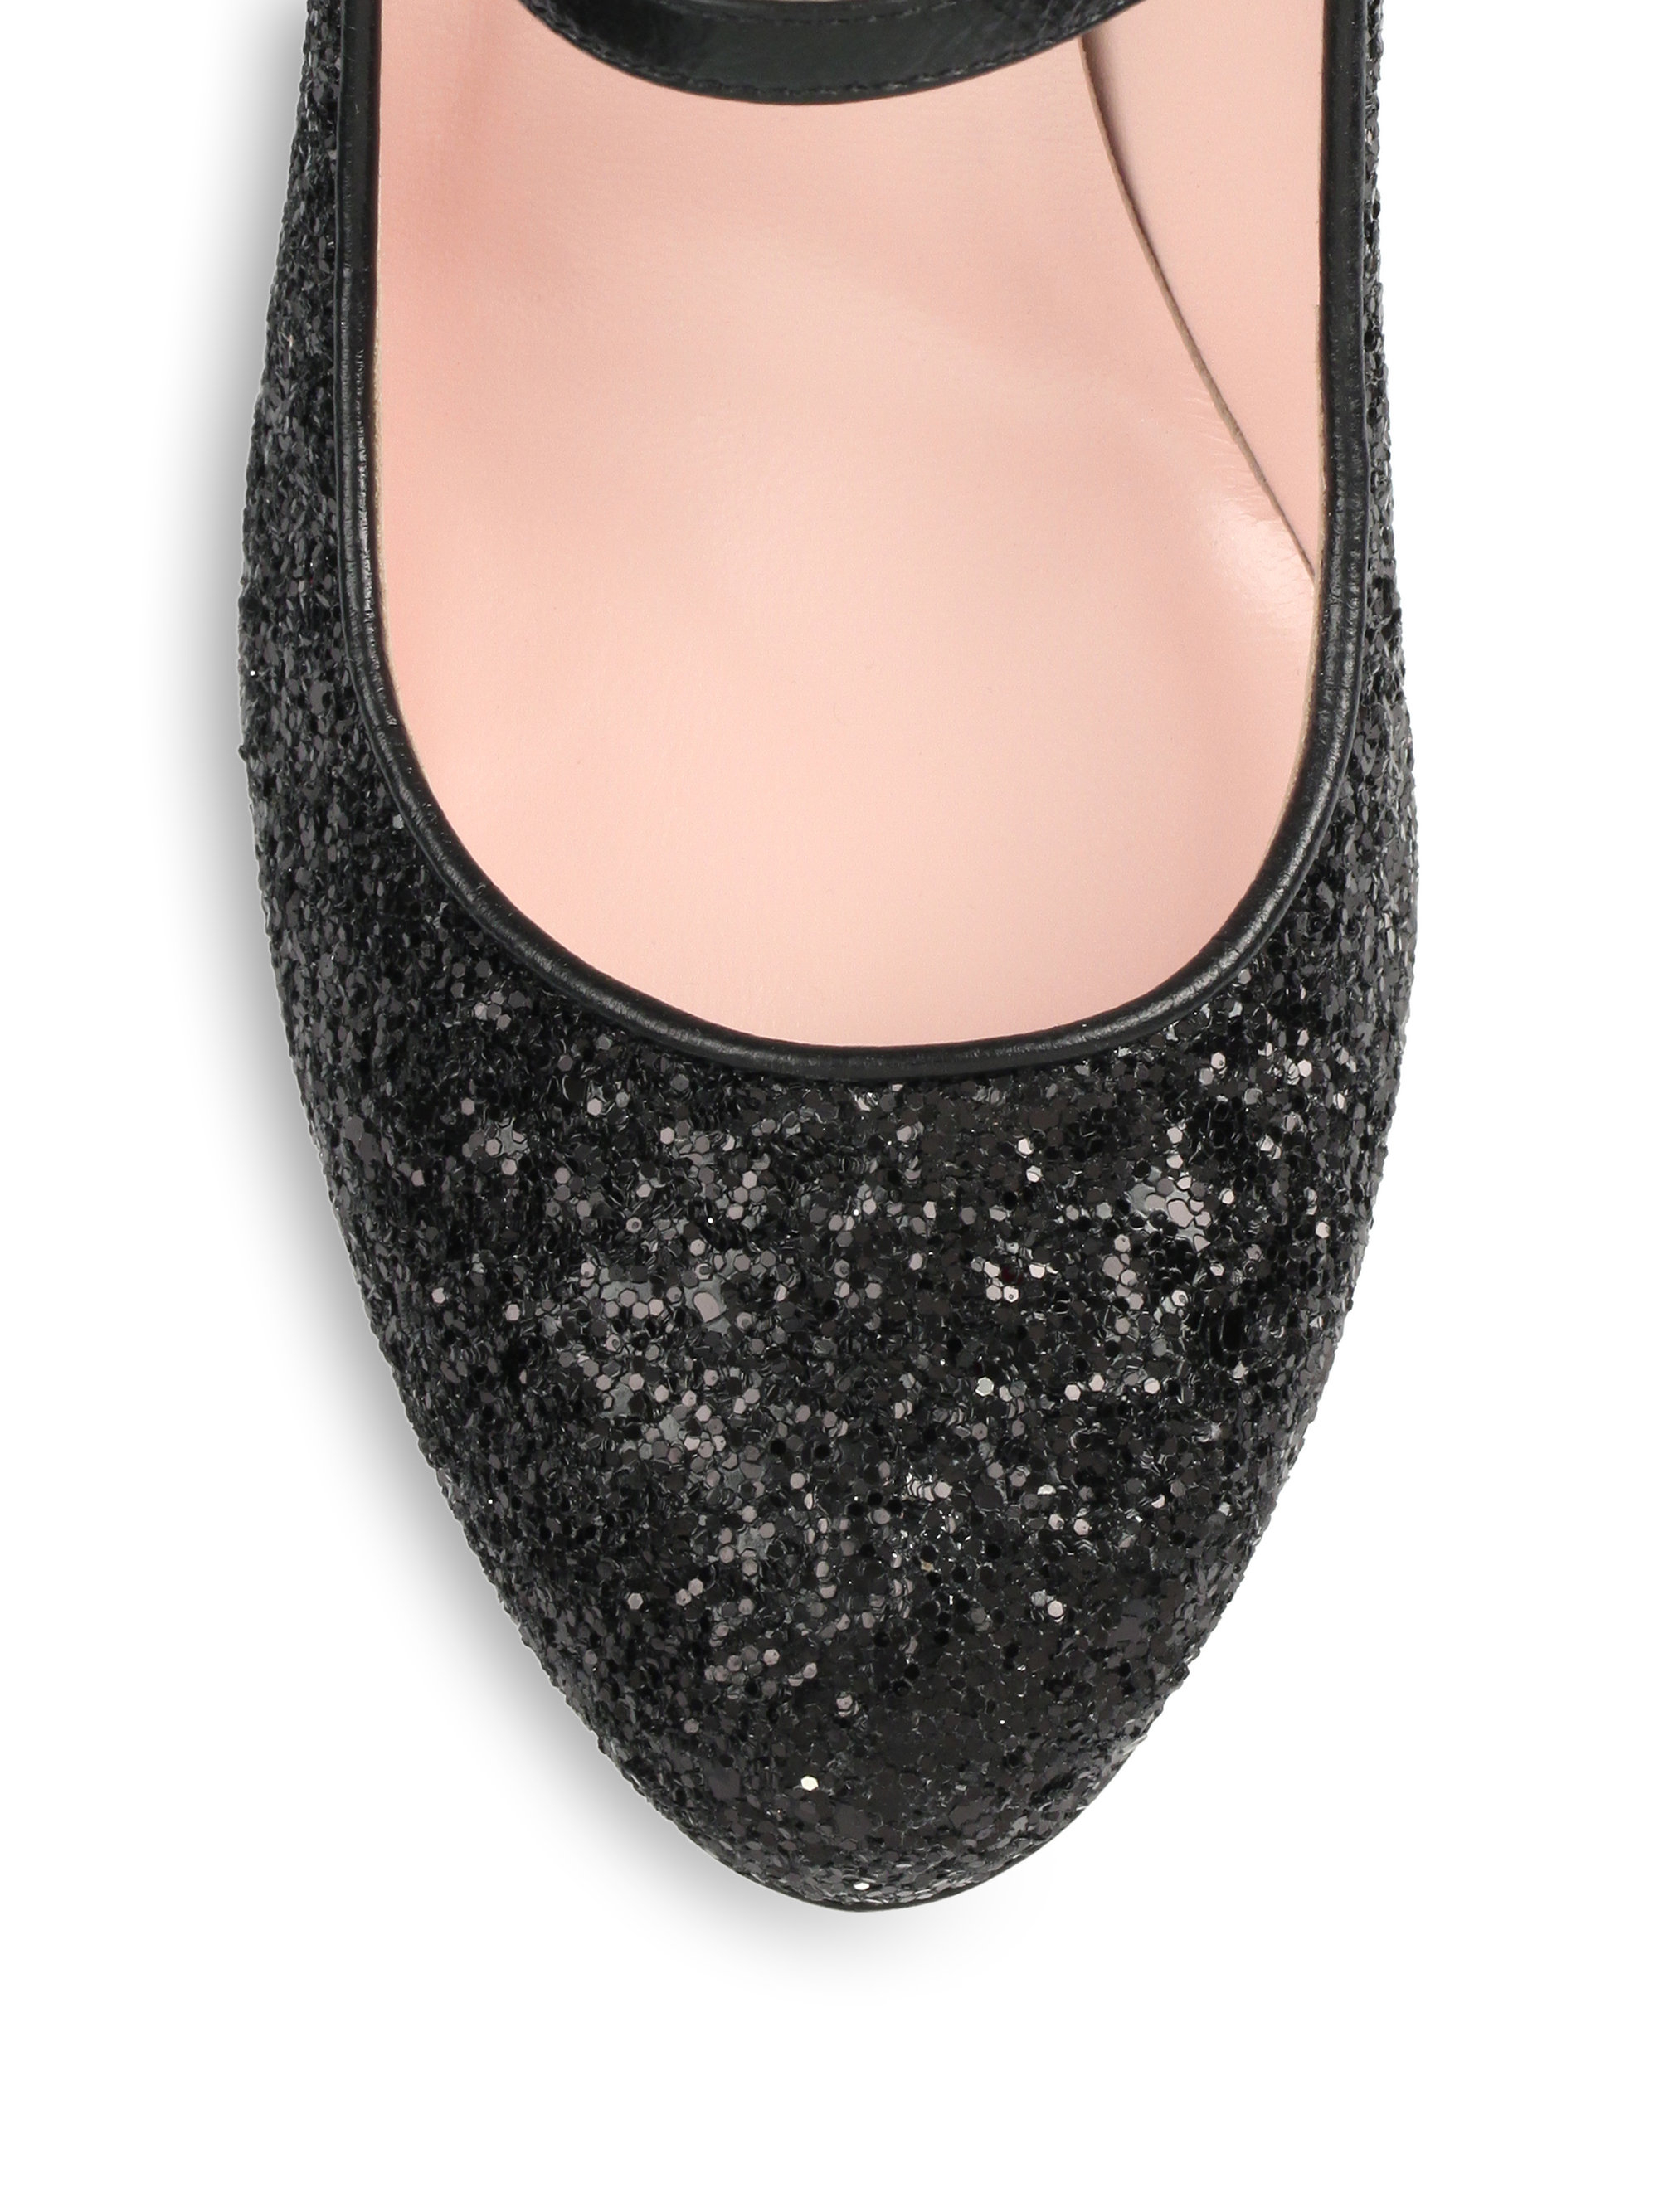 Kate spade new york Angelique Glitter Mary-Jane Pumps in Black | Lyst